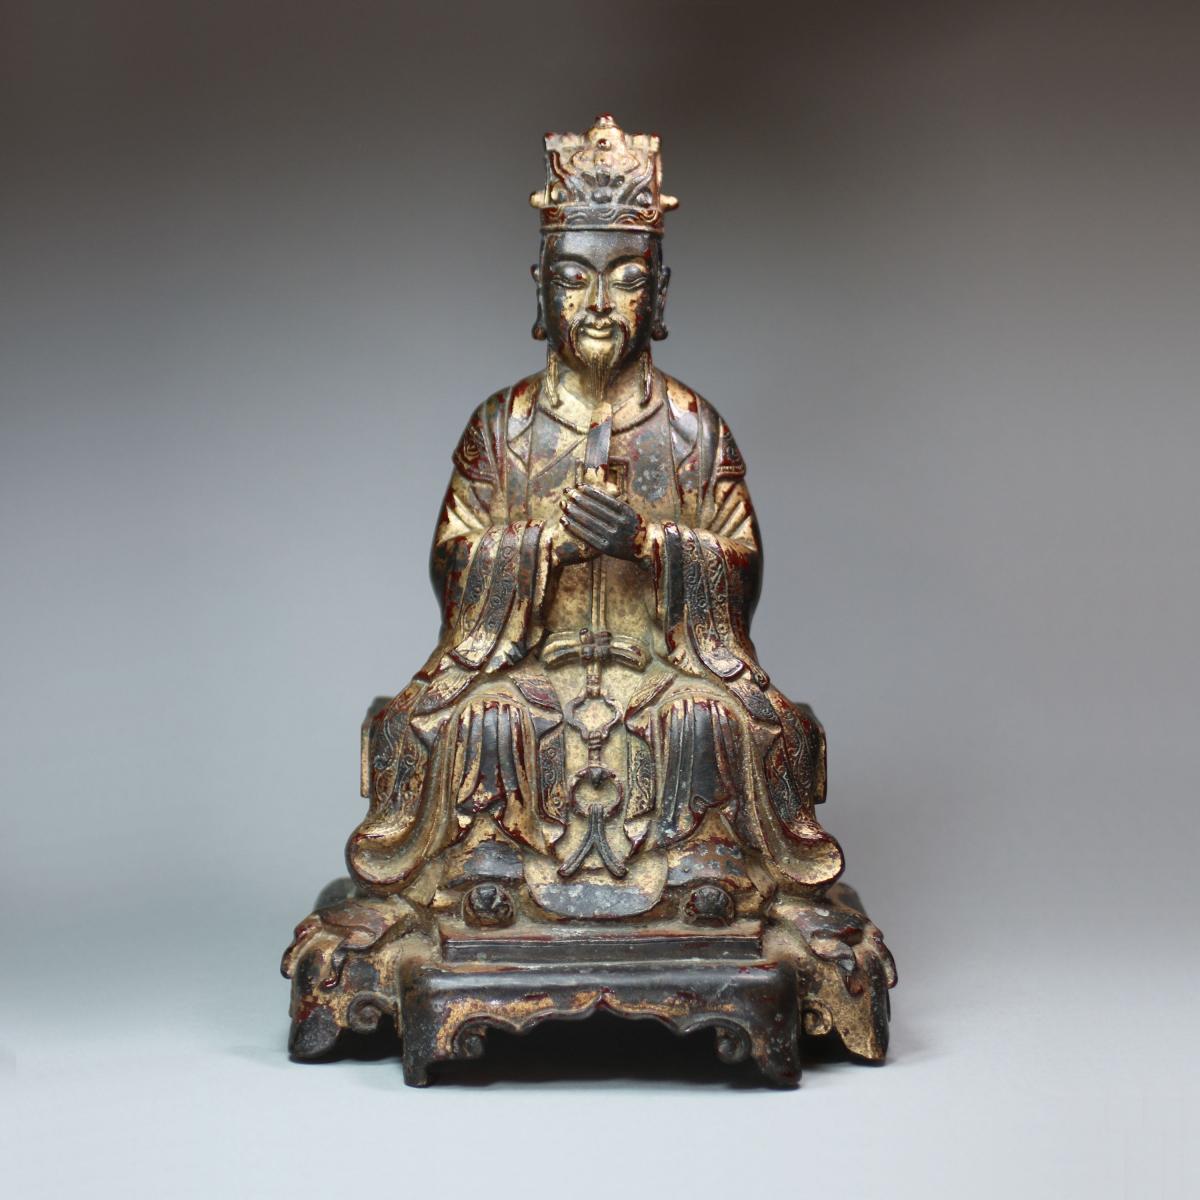 Chinese gilt-lacquer bronze figure of the Daoist deity Wenchang Wang